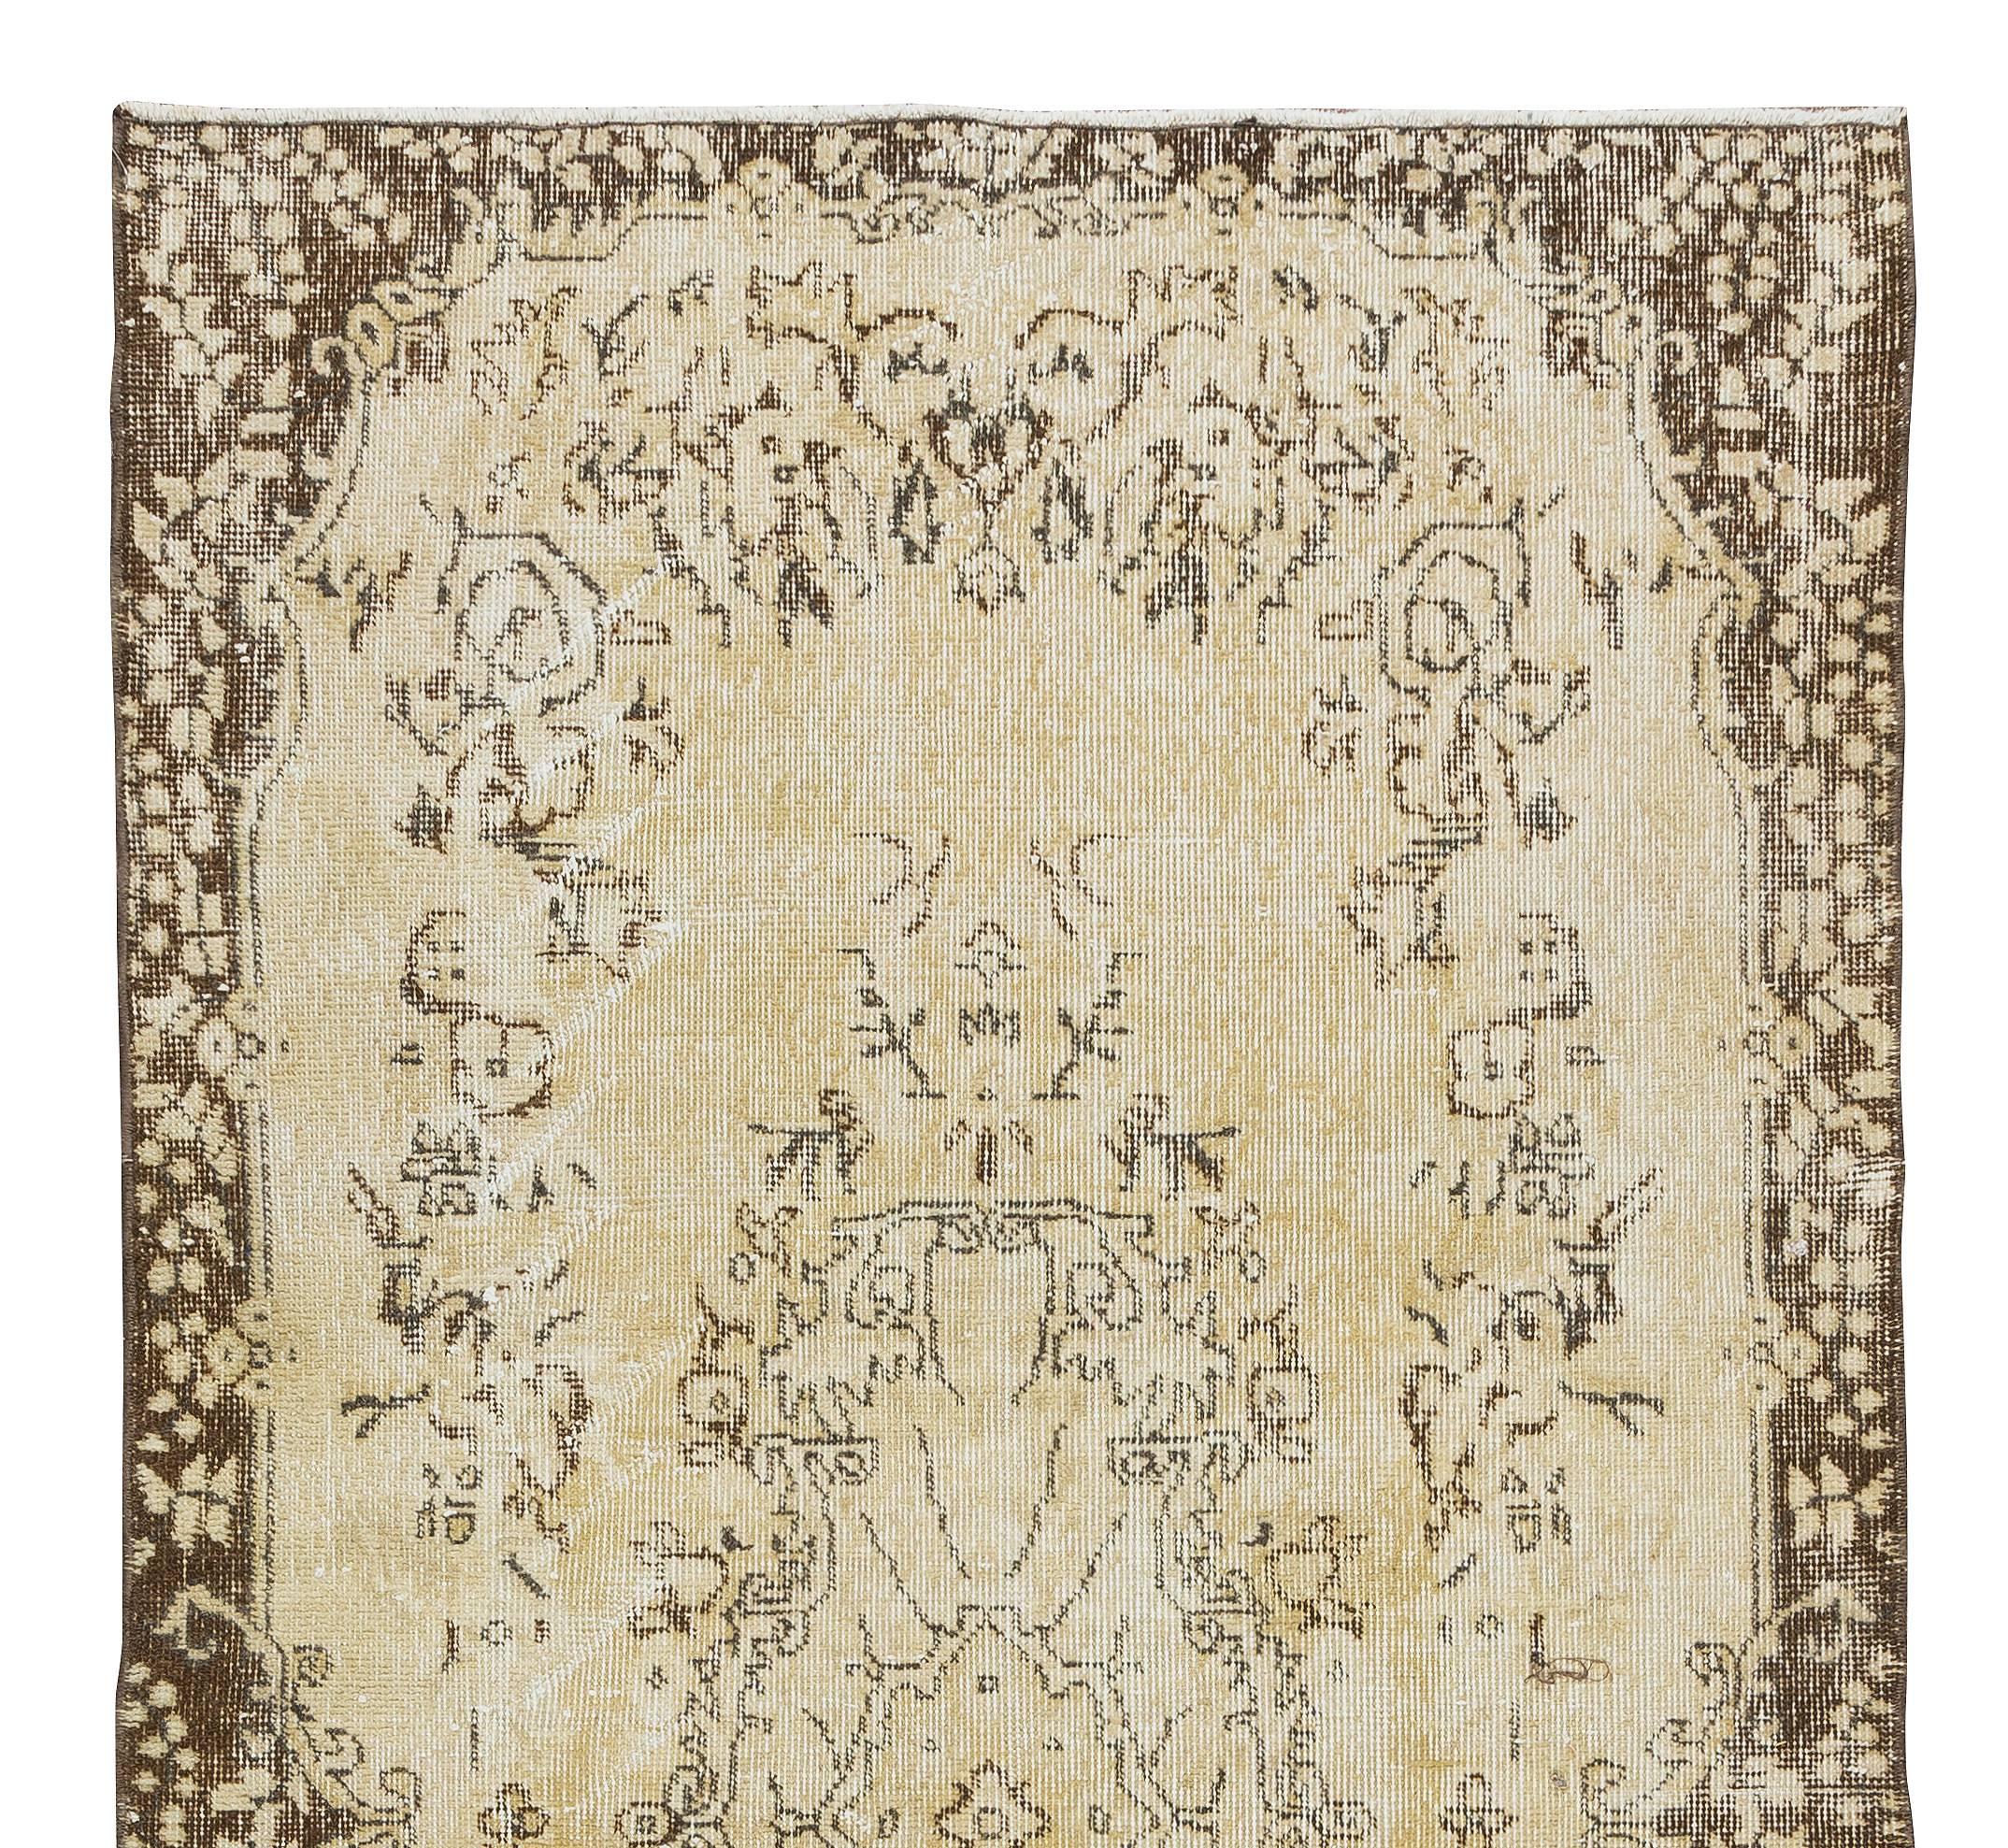 Hand-Woven Handmade Turkish Rug, Mid-Century Baroque Design Carpet in Muted Colors For Sale